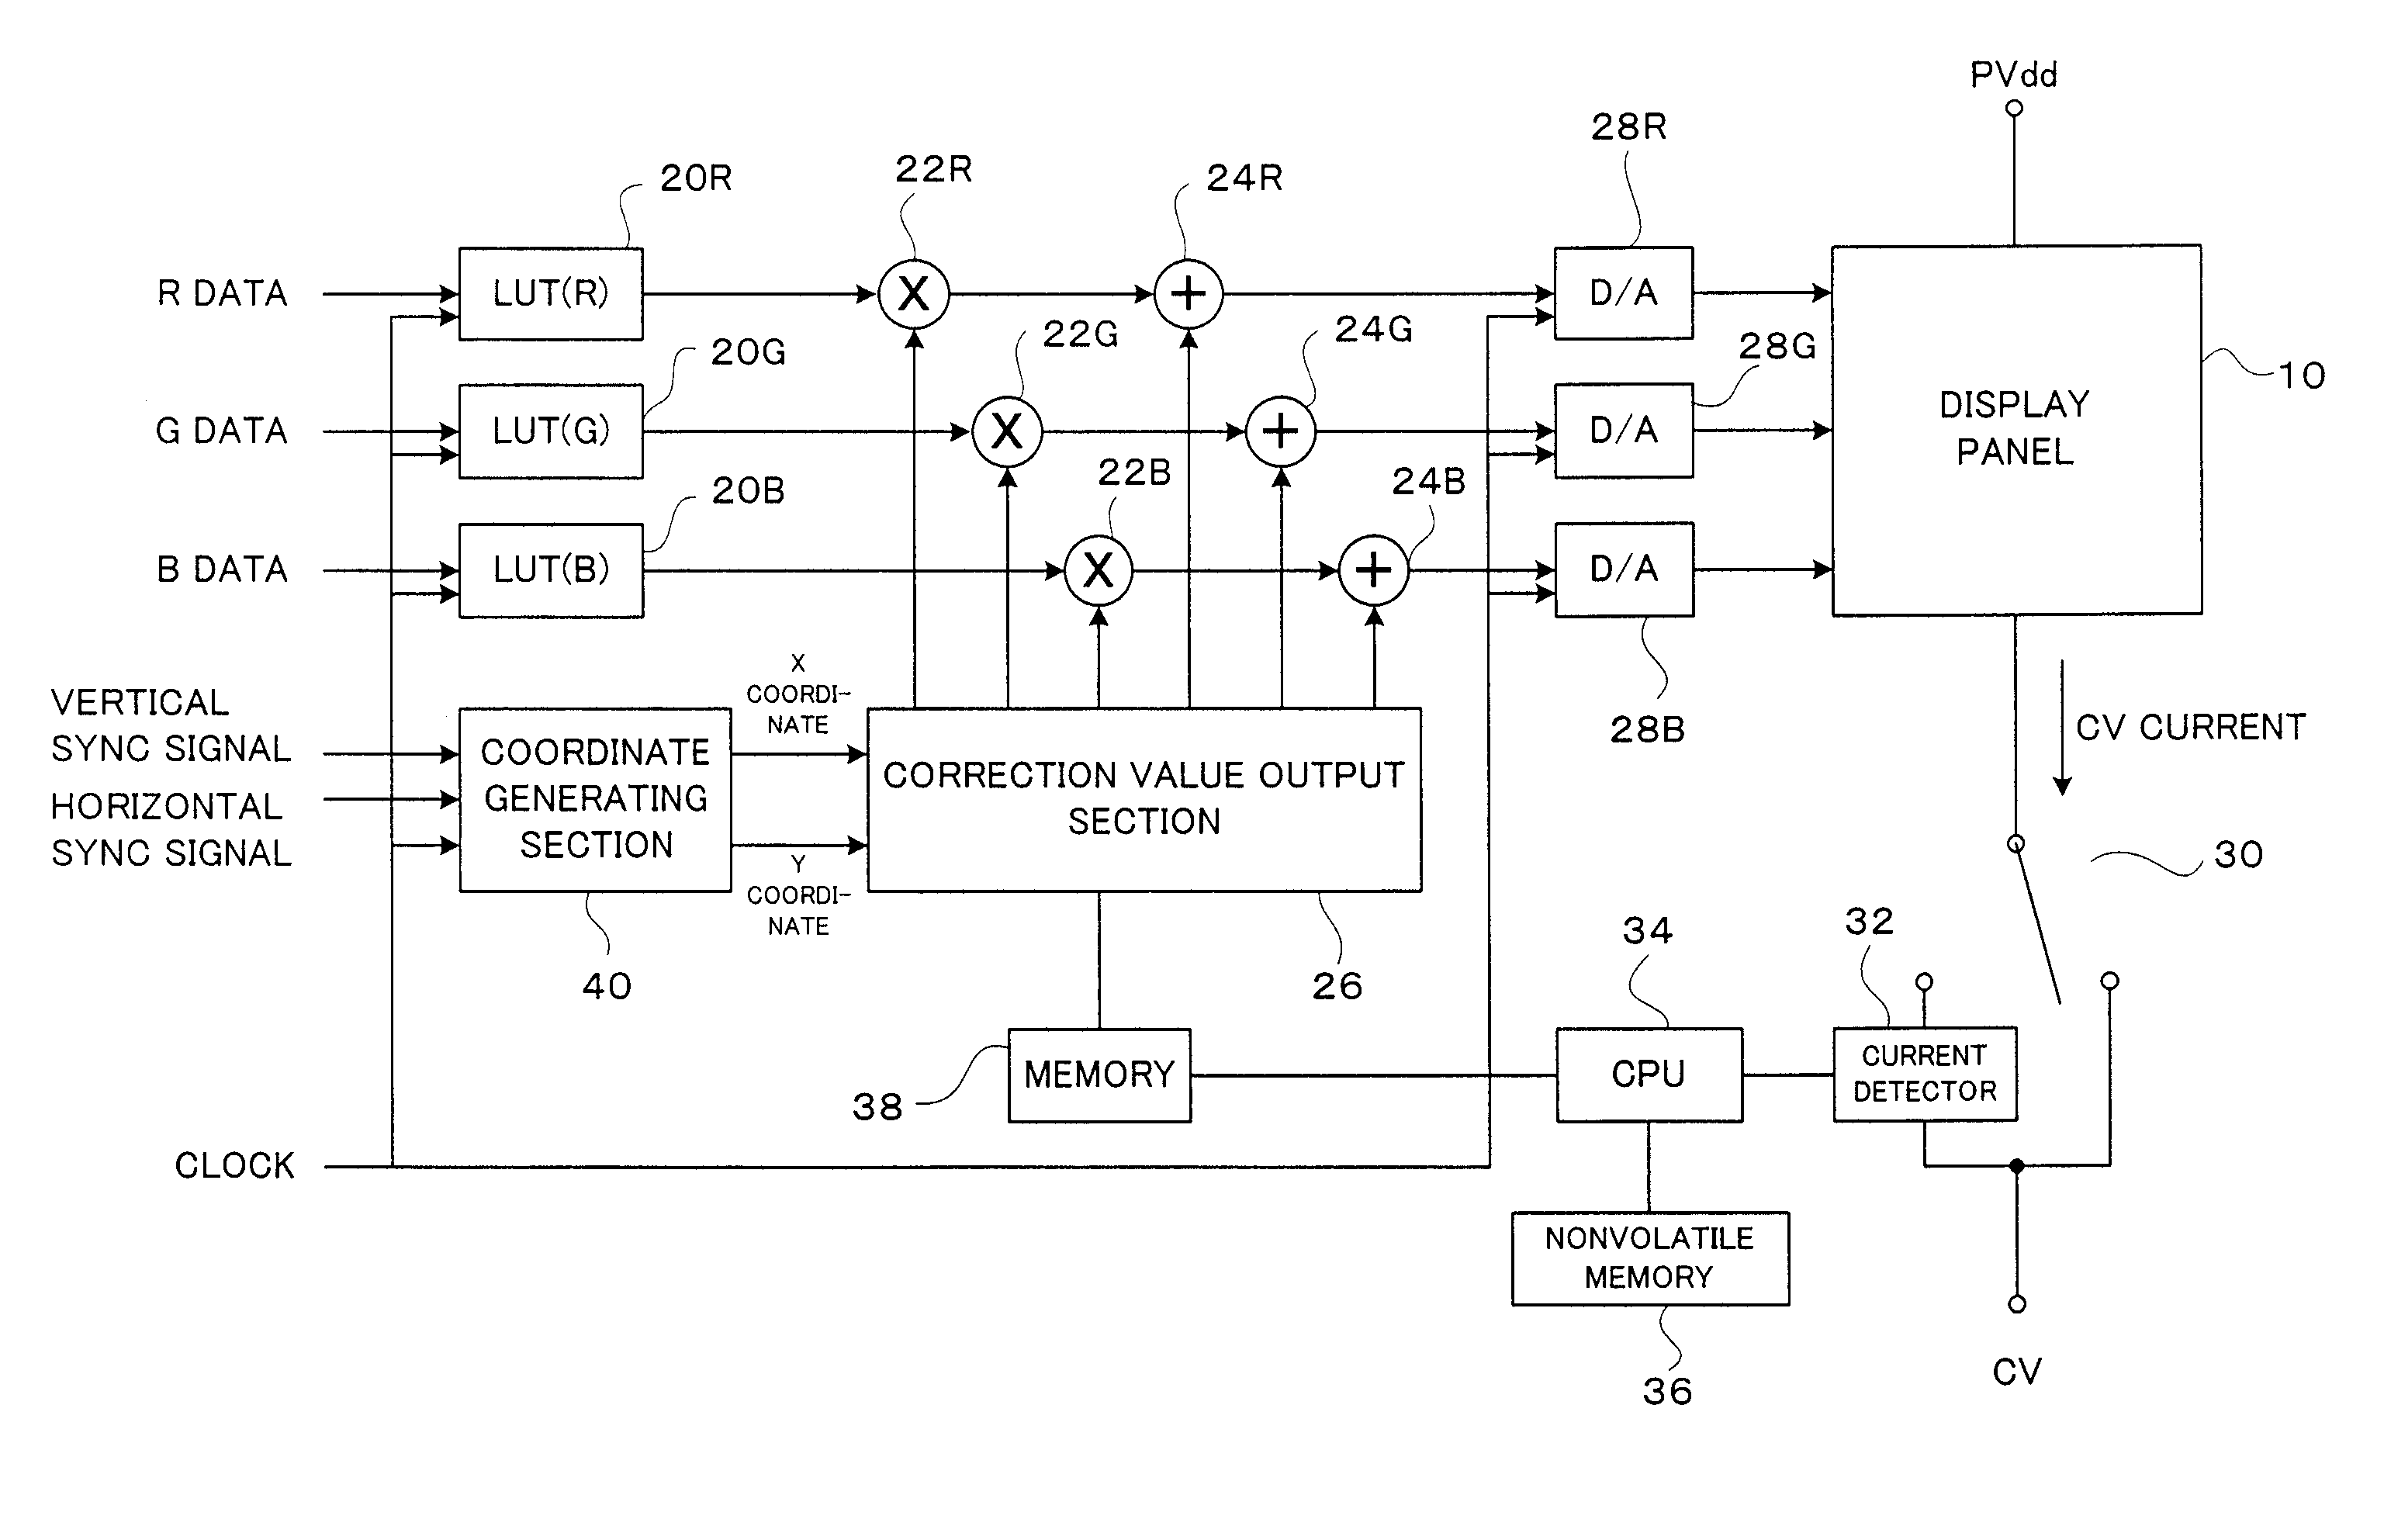 Assuring uniformity in the output of an OLED